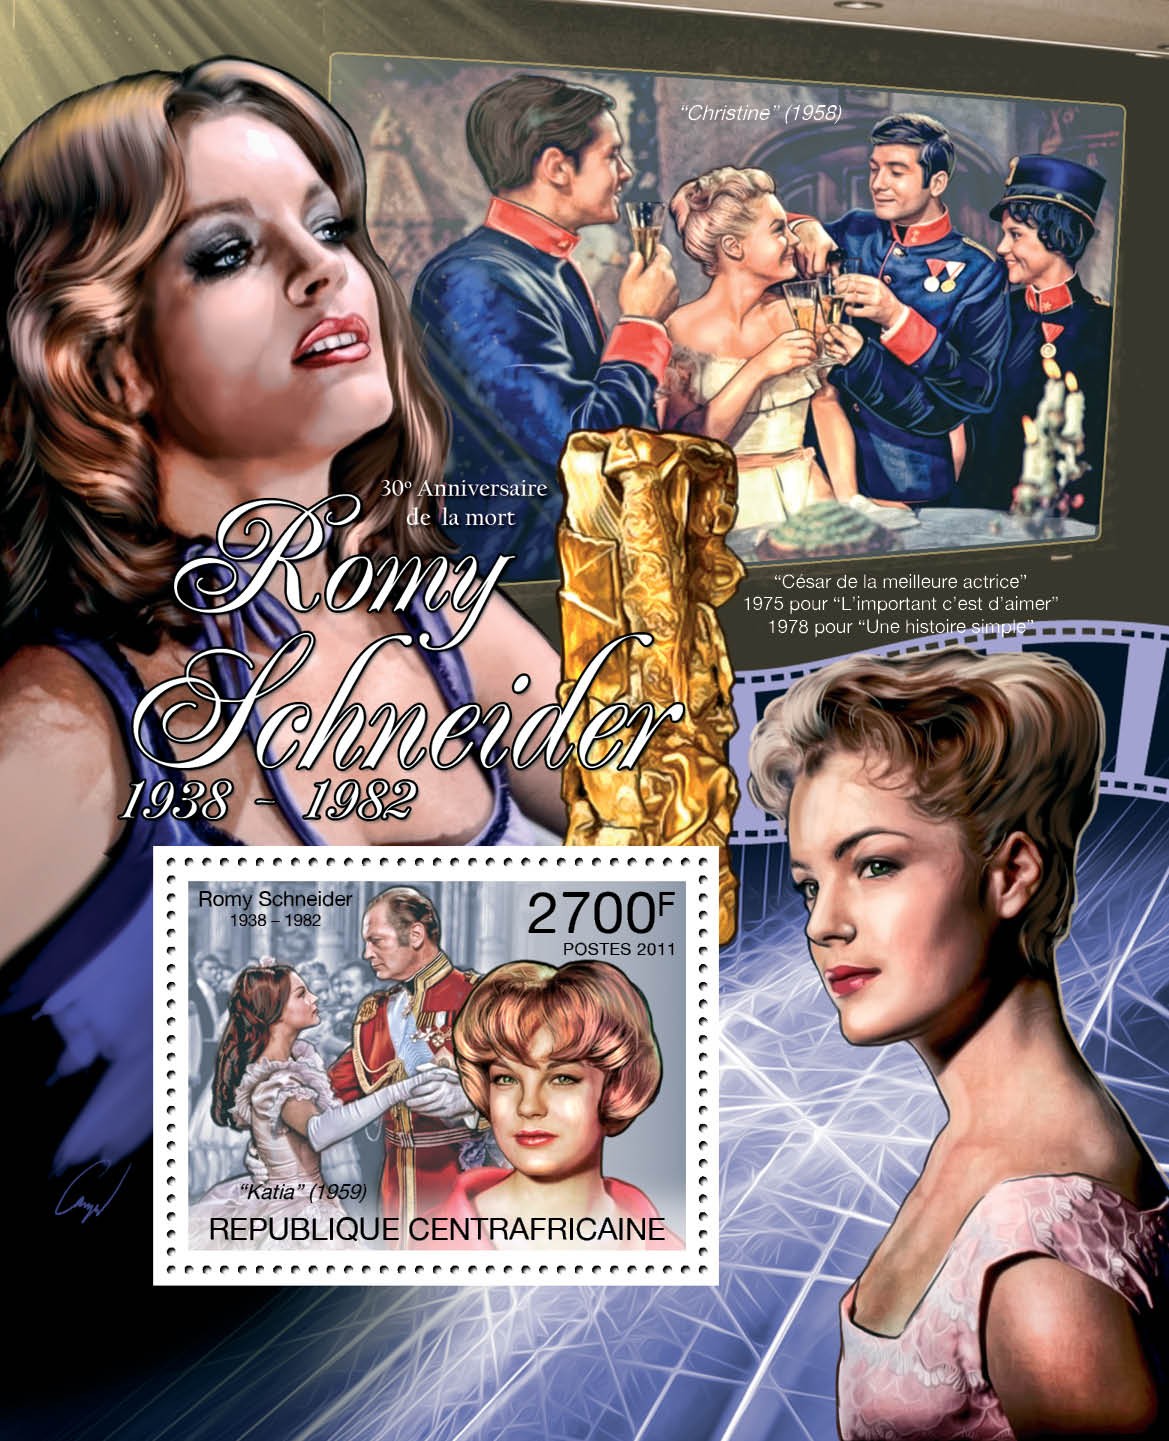 Romy Schneider, (1938-1982). - Issue of Central African republic postage stamps